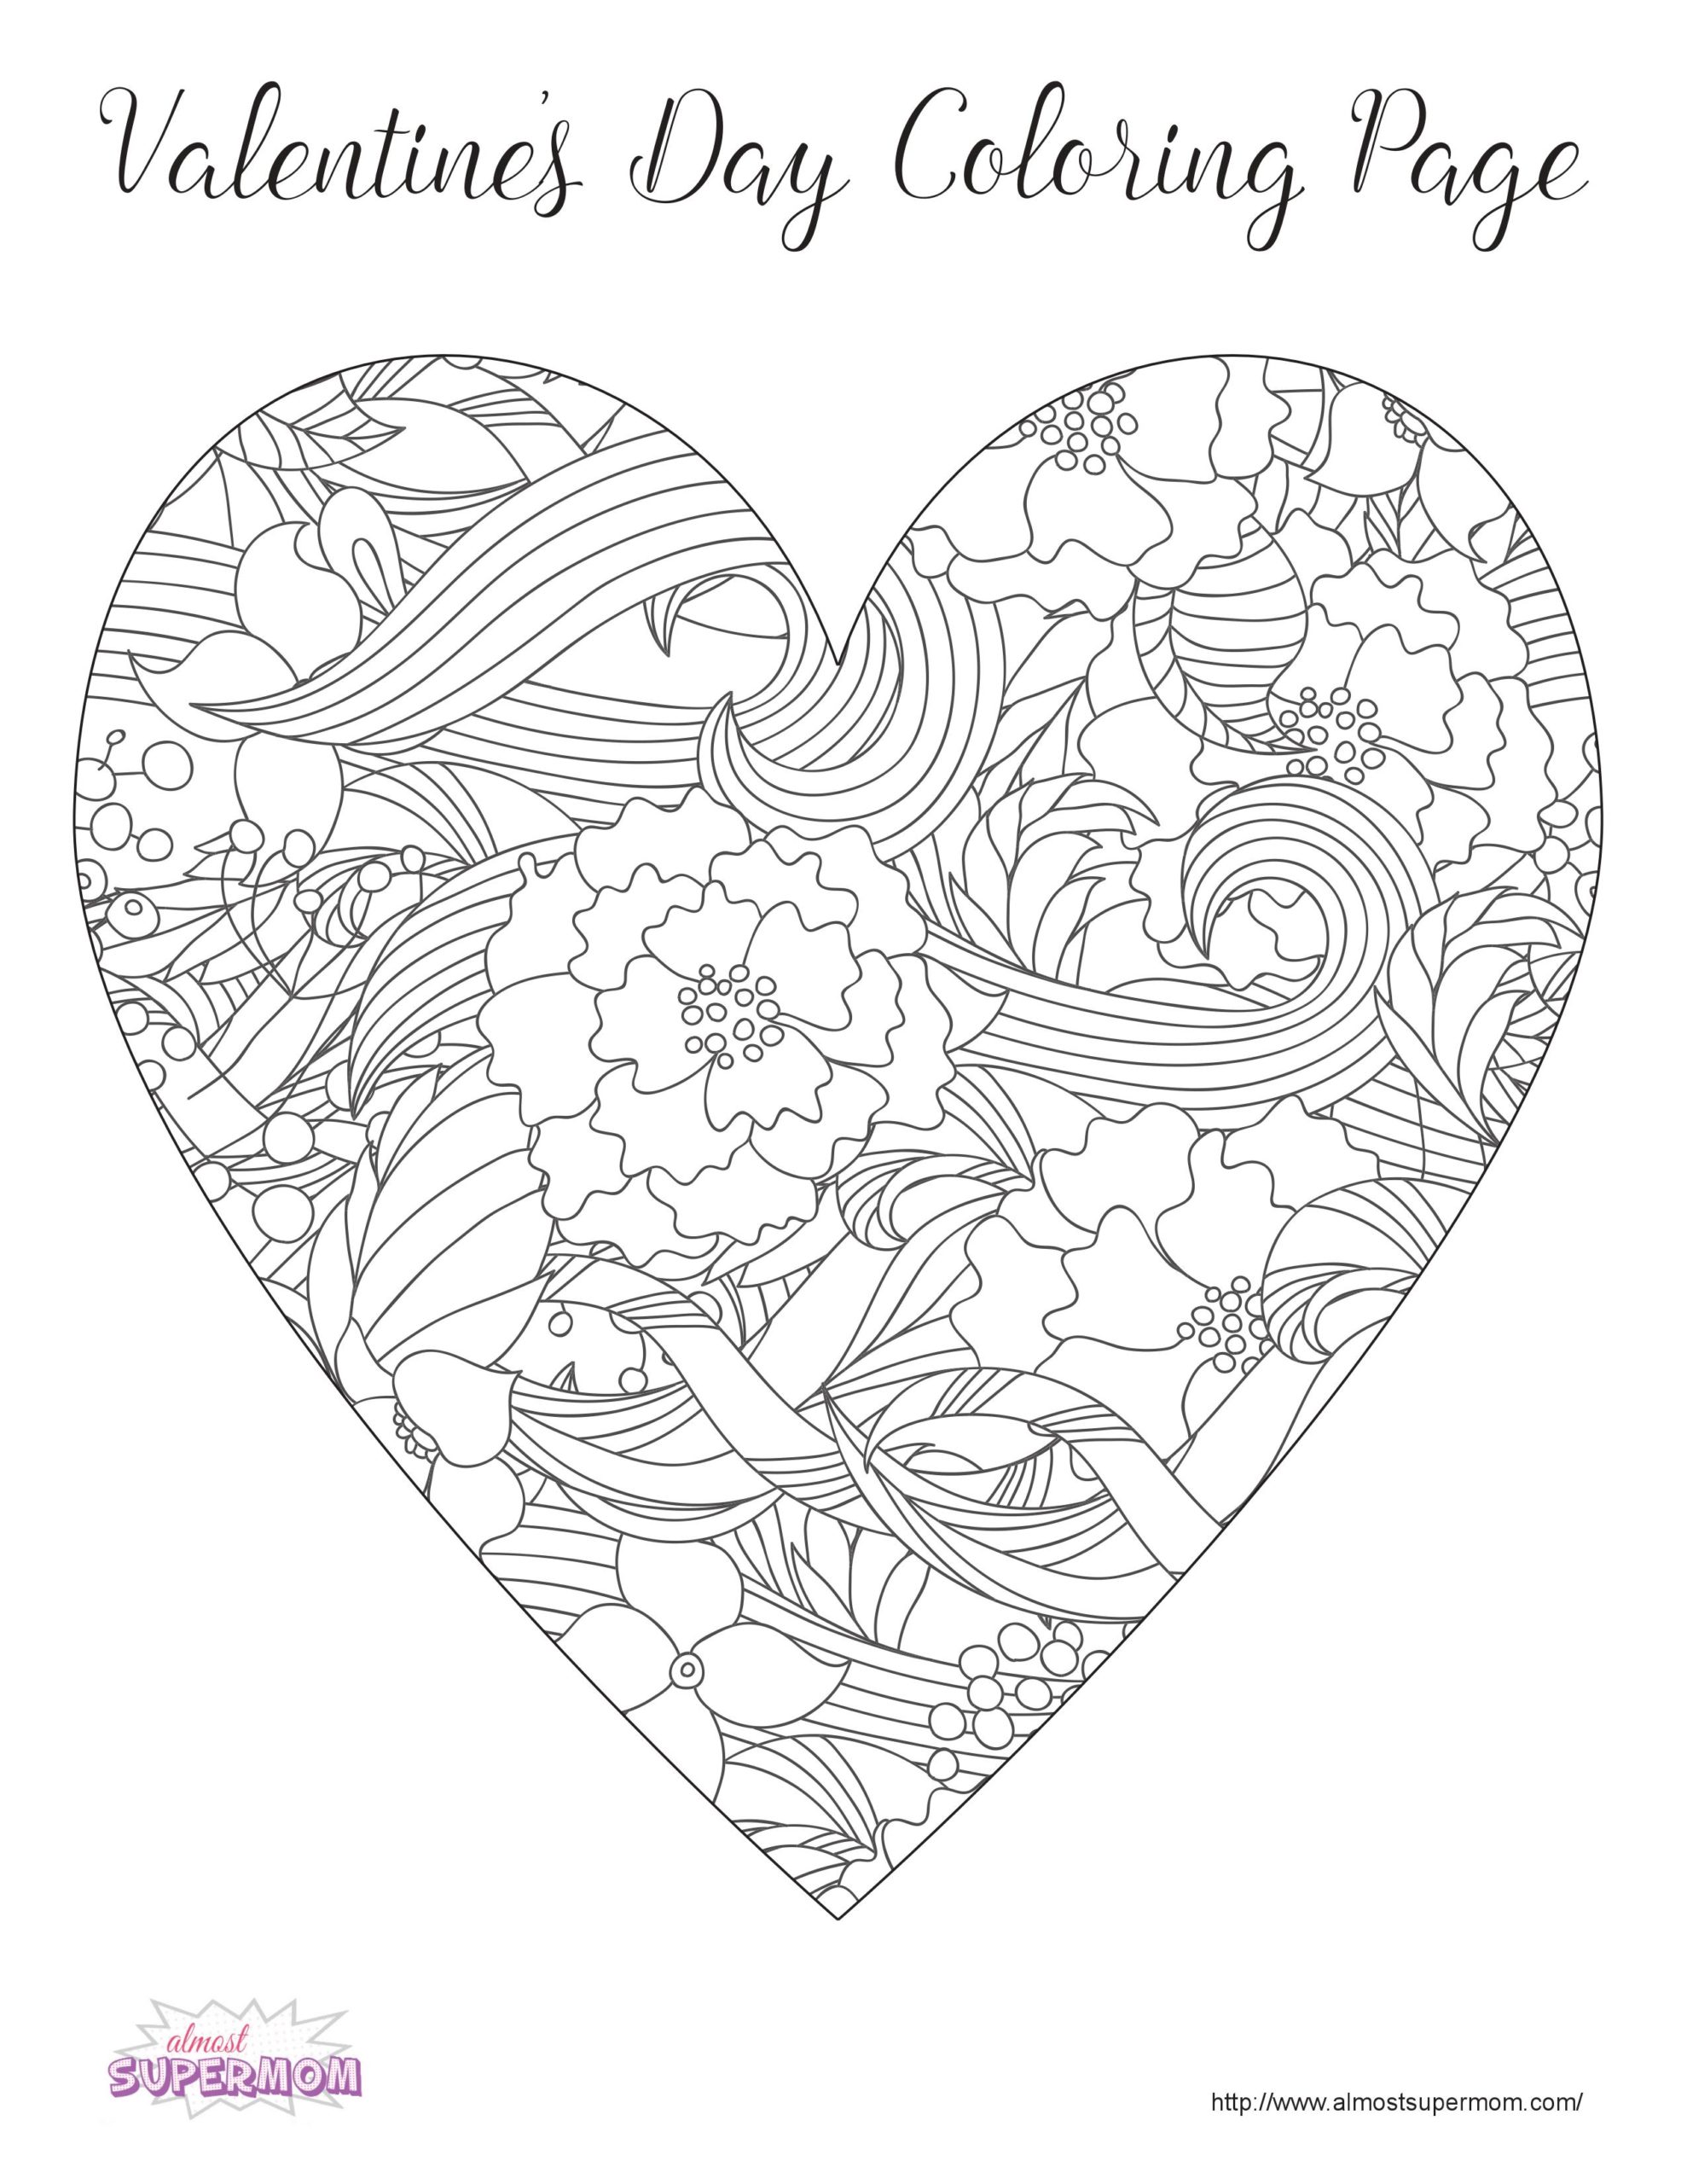 Best Coloring : Phenomenal Free Valentine Pages Image Ideas ...